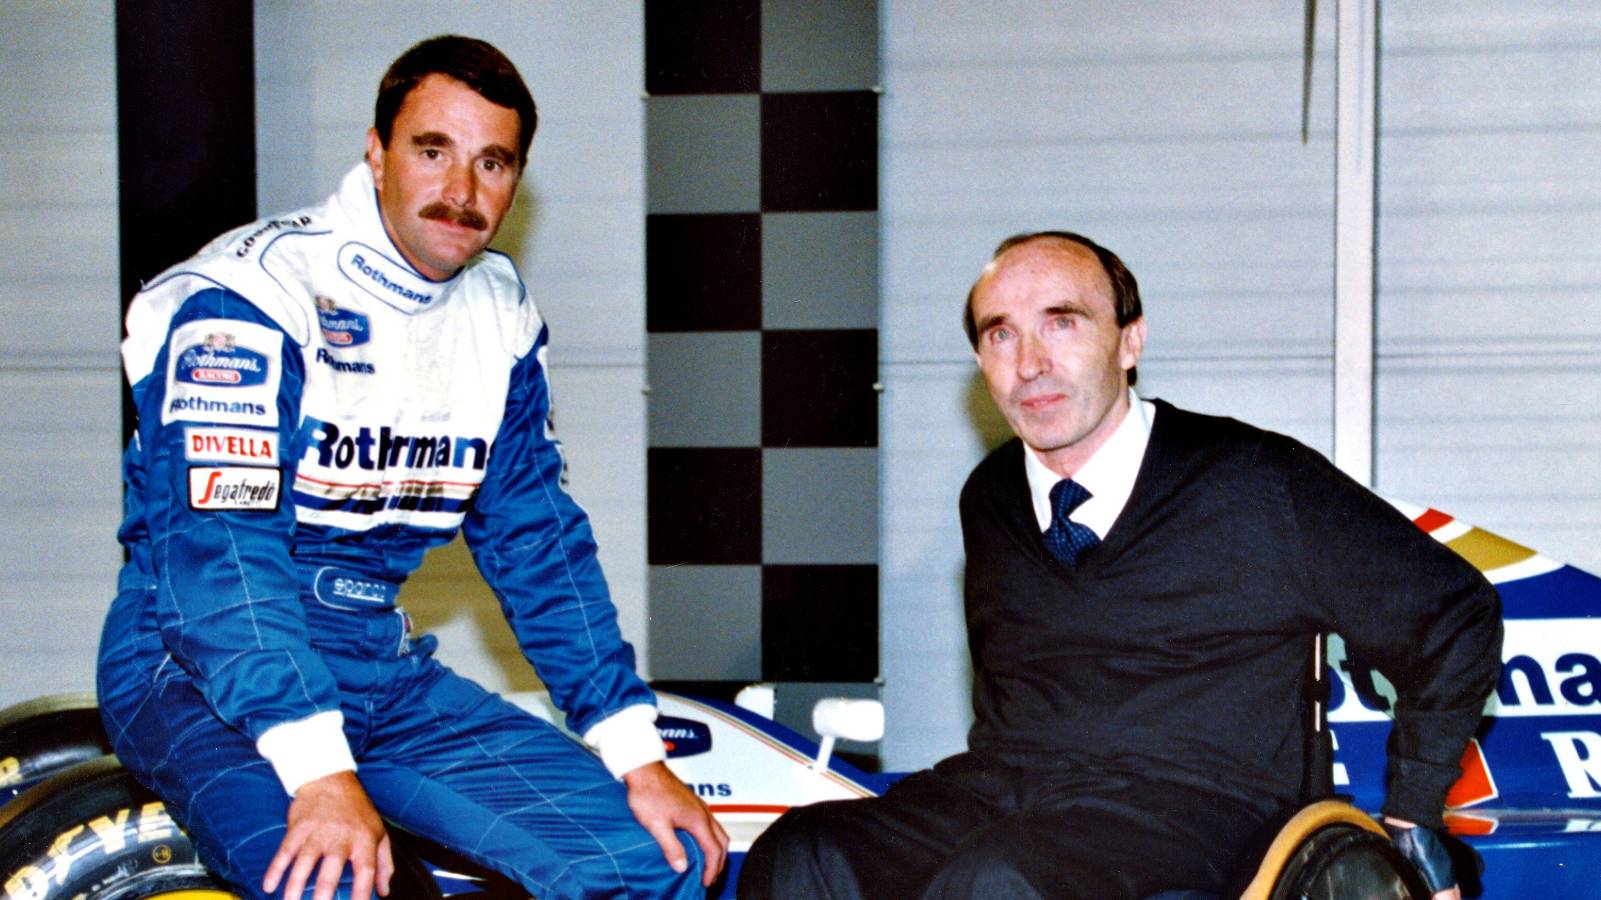 Nigel Mansell with Sir Frank Williams upon his return to the team in 1994.